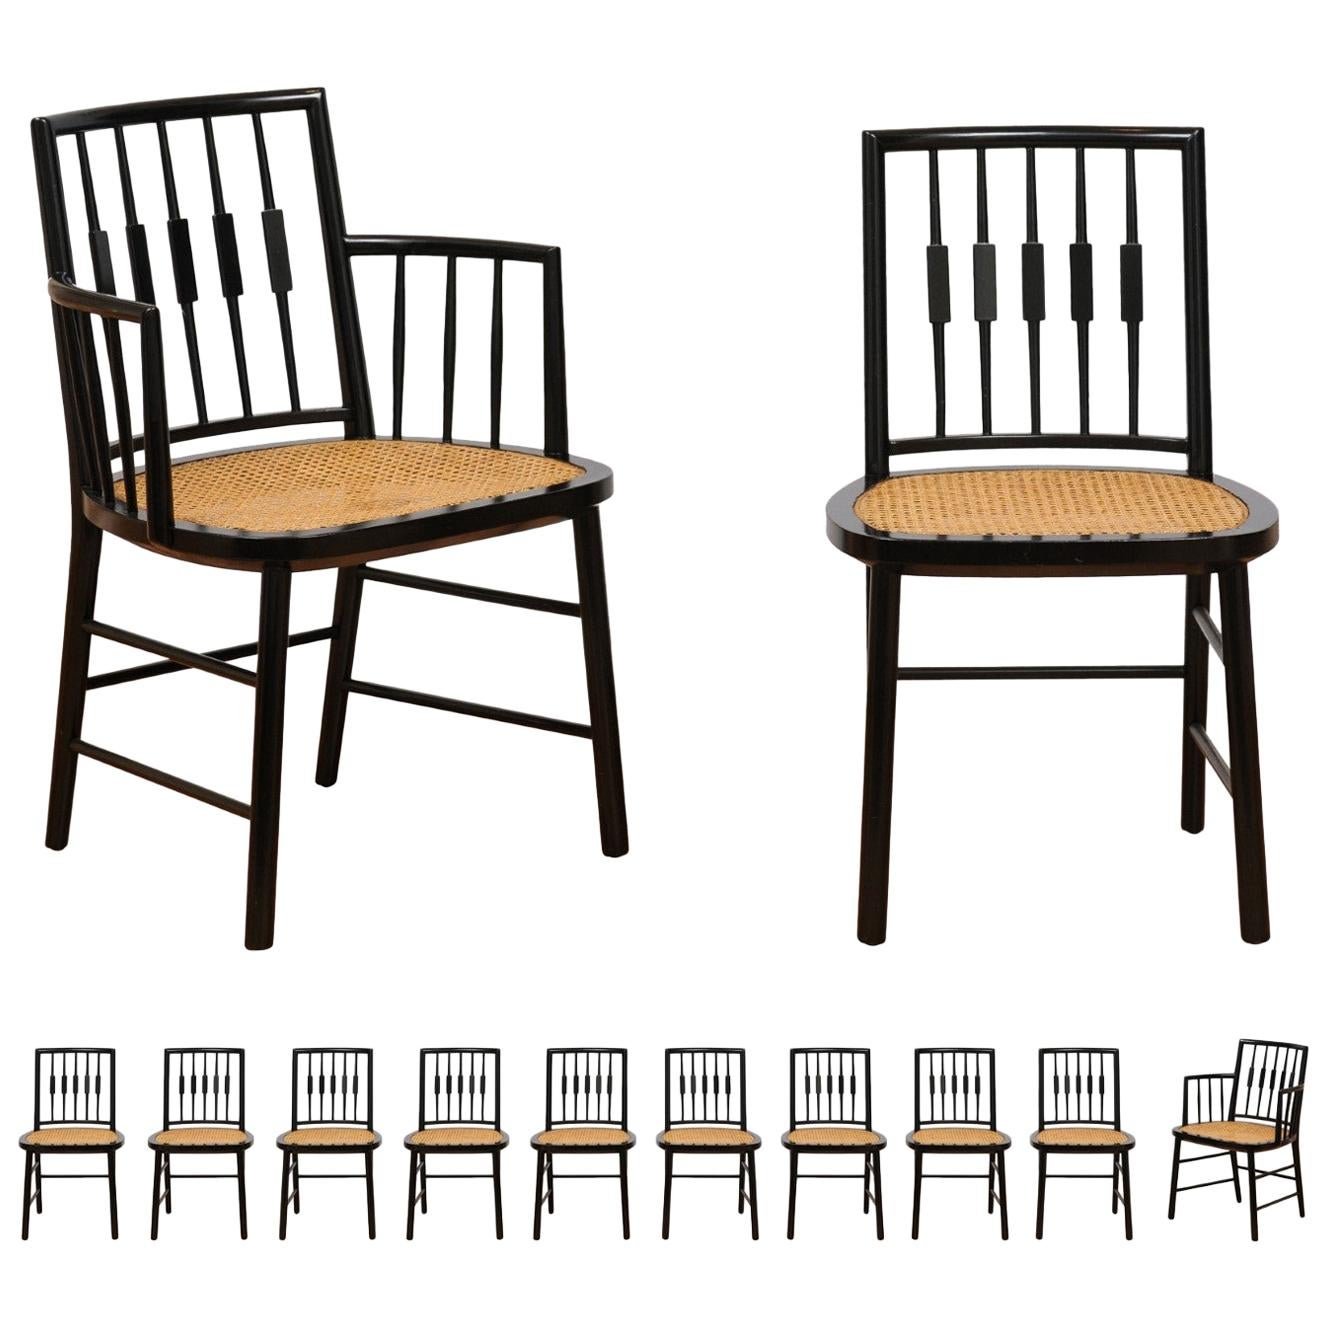 Stellar Set of 12 Modern Windsor Chairs by Michael Taylor, Cane Seats